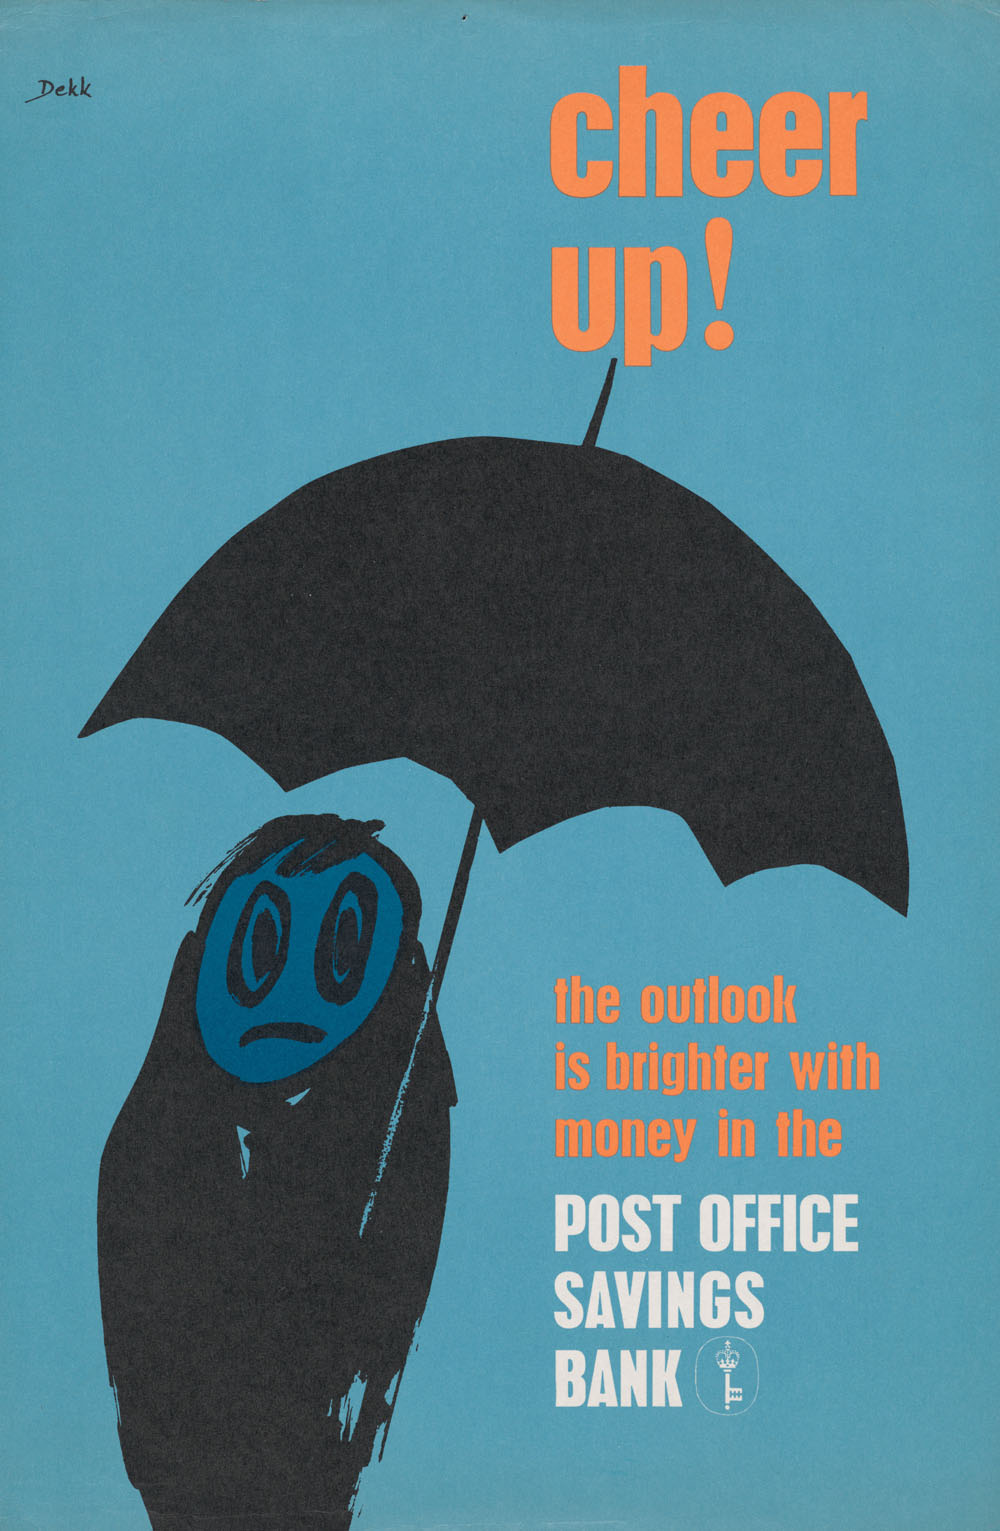 Cheer up! The outlook is brighter with money in the Post Office Savings Bank